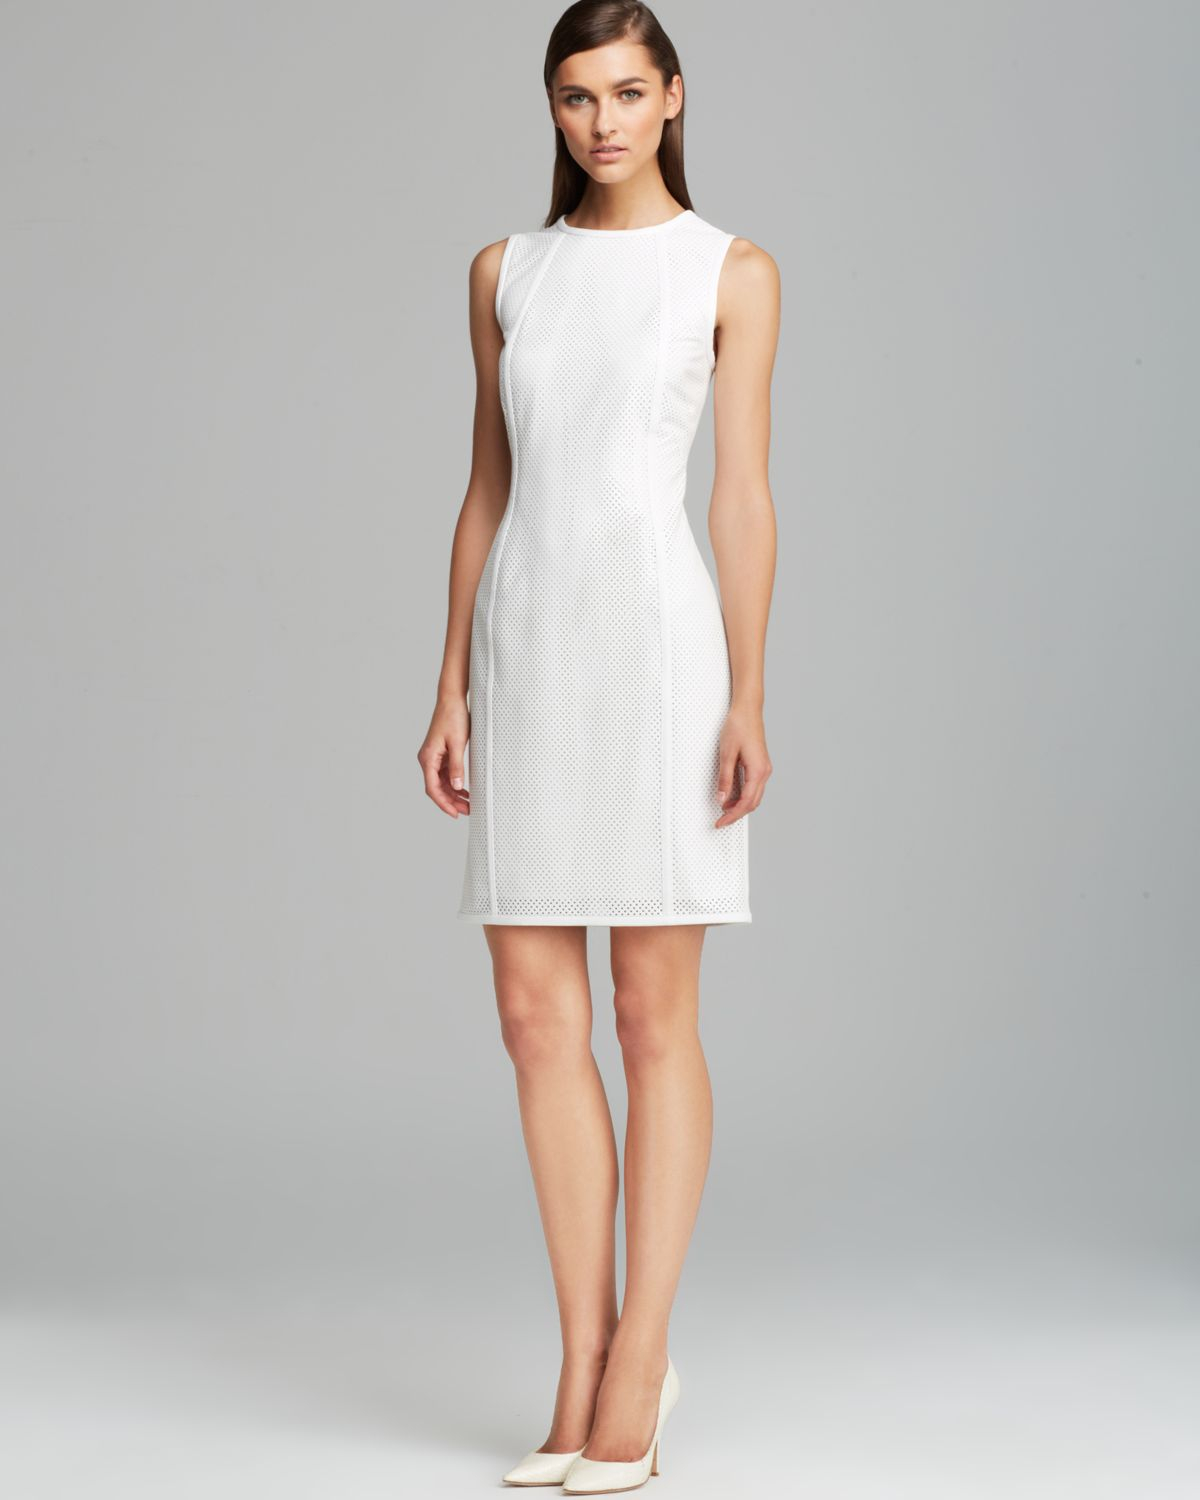 Calvin Klein Perforated Faux Leather Dress in White | Lyst